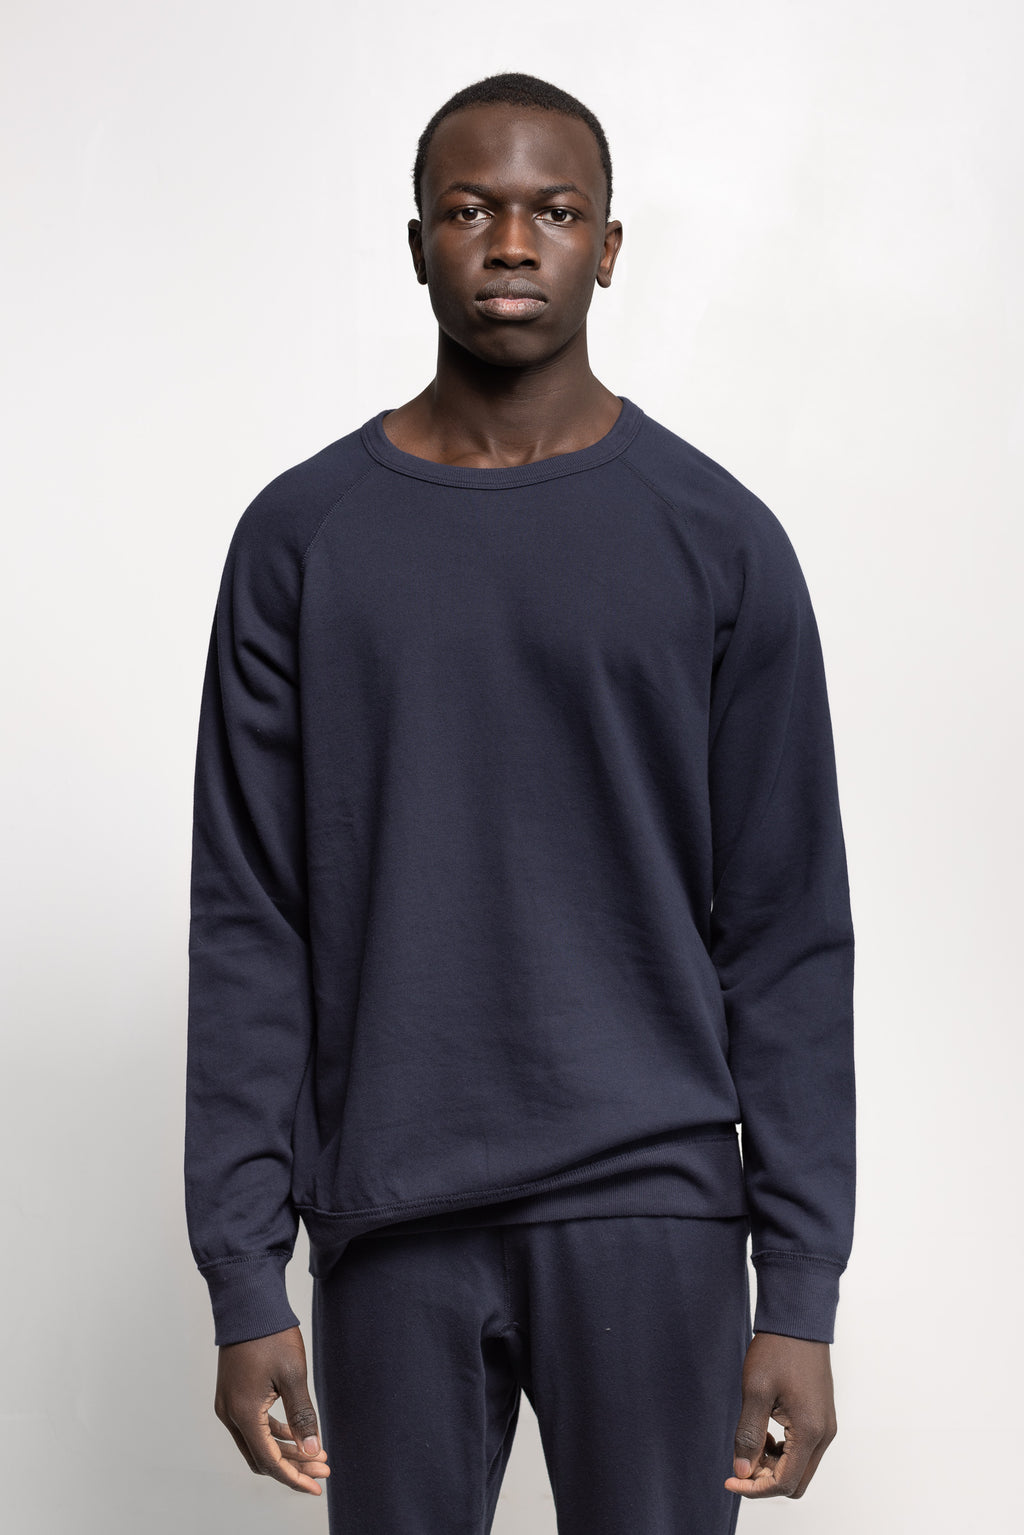 NS2117A-1 250g French Terry Long Sleeve Crew in Navy 01